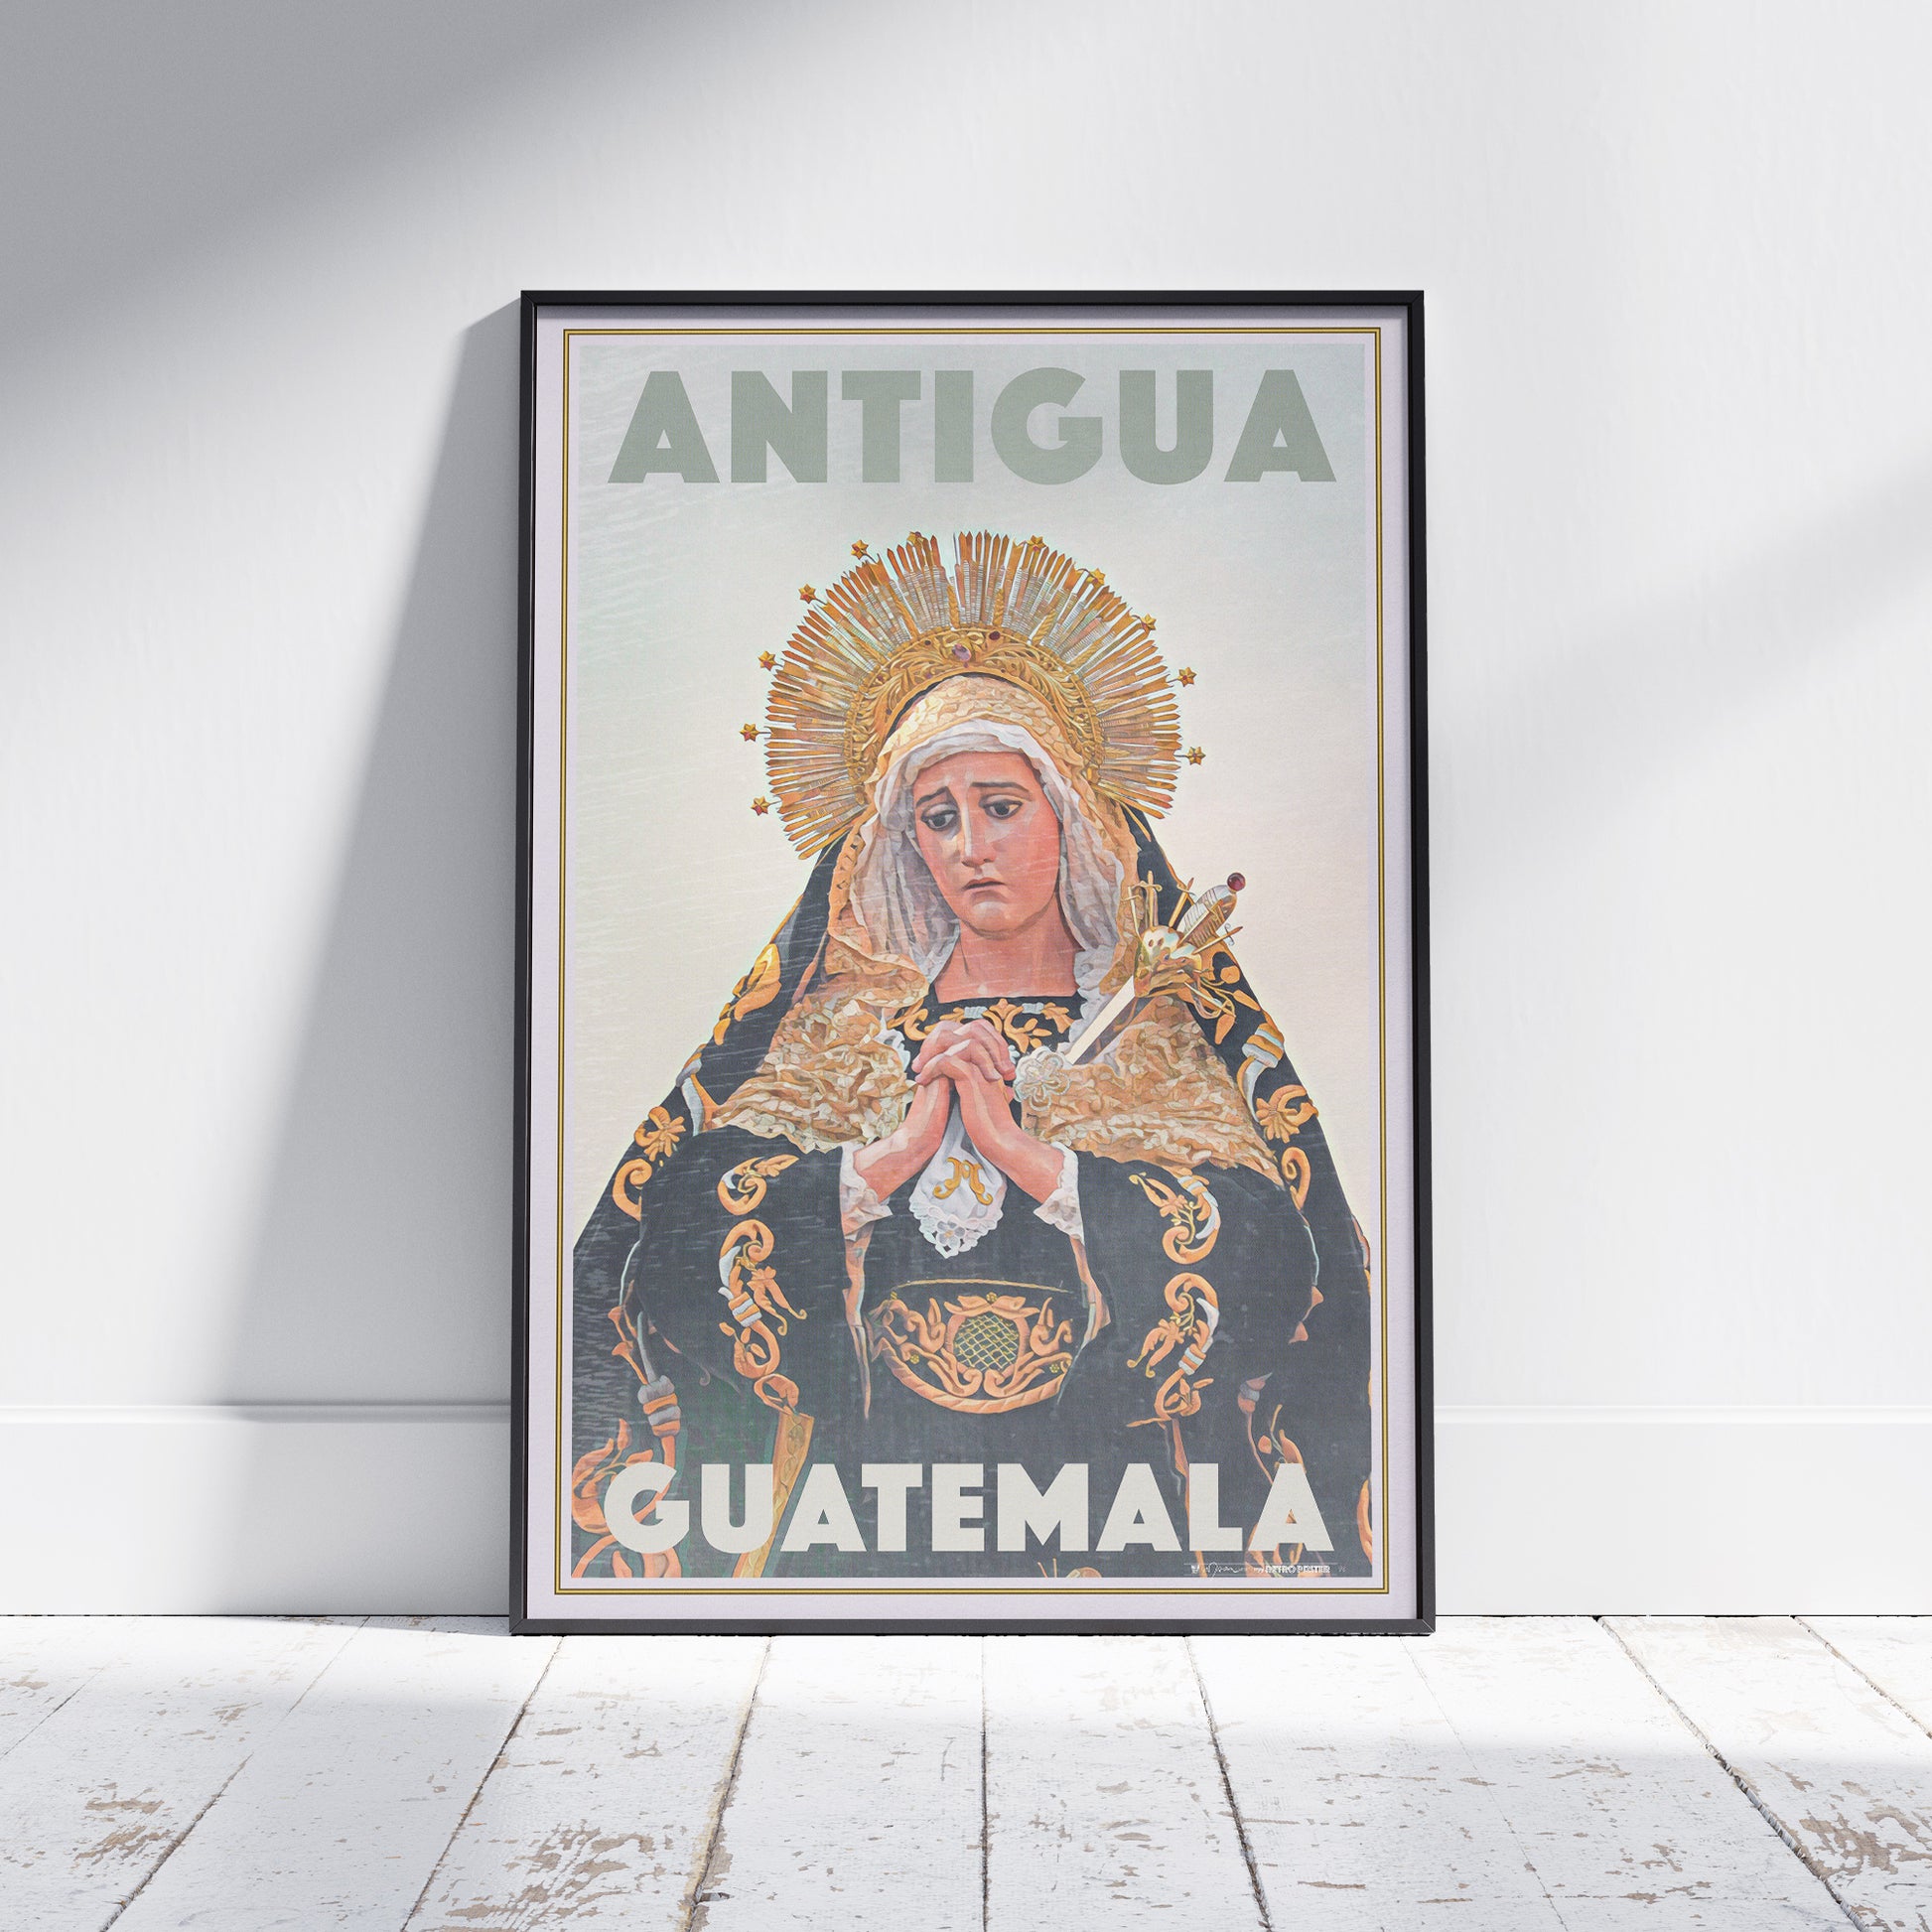 Limited edition 'Virgin Mary Poster Antigua' by Alecse with detailed depiction of religious iconography from Guatemala